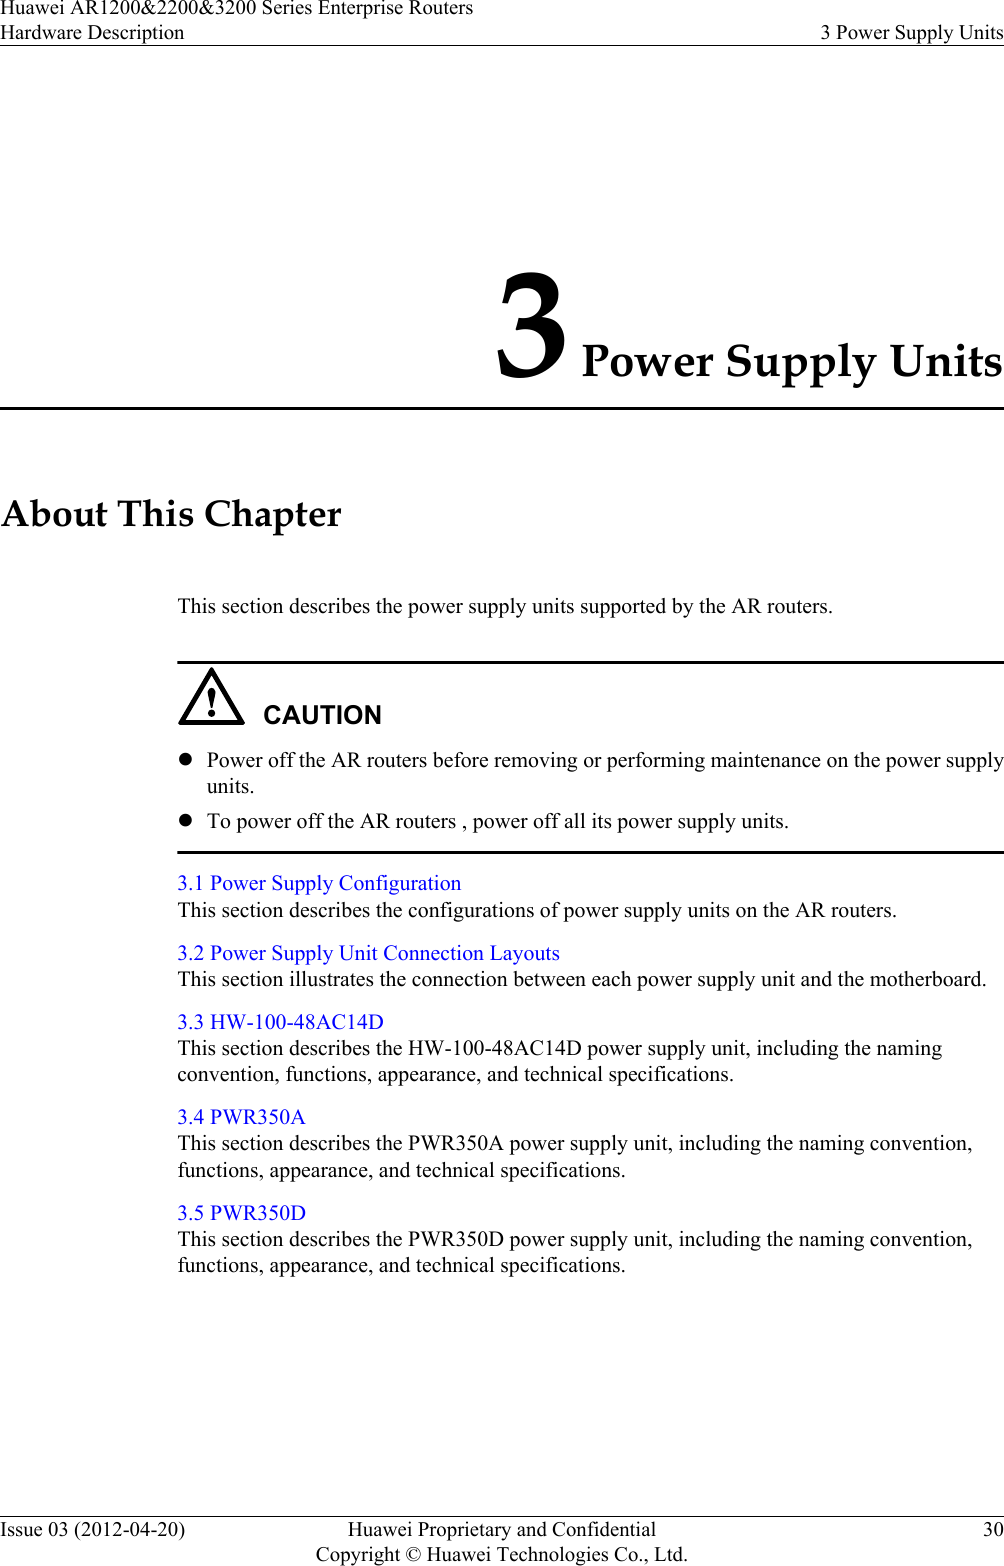 3 Power Supply UnitsAbout This ChapterThis section describes the power supply units supported by the AR routers.CAUTIONlPower off the AR routers before removing or performing maintenance on the power supplyunits.lTo power off the AR routers , power off all its power supply units.3.1 Power Supply ConfigurationThis section describes the configurations of power supply units on the AR routers.3.2 Power Supply Unit Connection LayoutsThis section illustrates the connection between each power supply unit and the motherboard.3.3 HW-100-48AC14DThis section describes the HW-100-48AC14D power supply unit, including the namingconvention, functions, appearance, and technical specifications.3.4 PWR350AThis section describes the PWR350A power supply unit, including the naming convention,functions, appearance, and technical specifications.3.5 PWR350DThis section describes the PWR350D power supply unit, including the naming convention,functions, appearance, and technical specifications.Huawei AR1200&amp;2200&amp;3200 Series Enterprise RoutersHardware Description 3 Power Supply UnitsIssue 03 (2012-04-20) Huawei Proprietary and ConfidentialCopyright © Huawei Technologies Co., Ltd.30